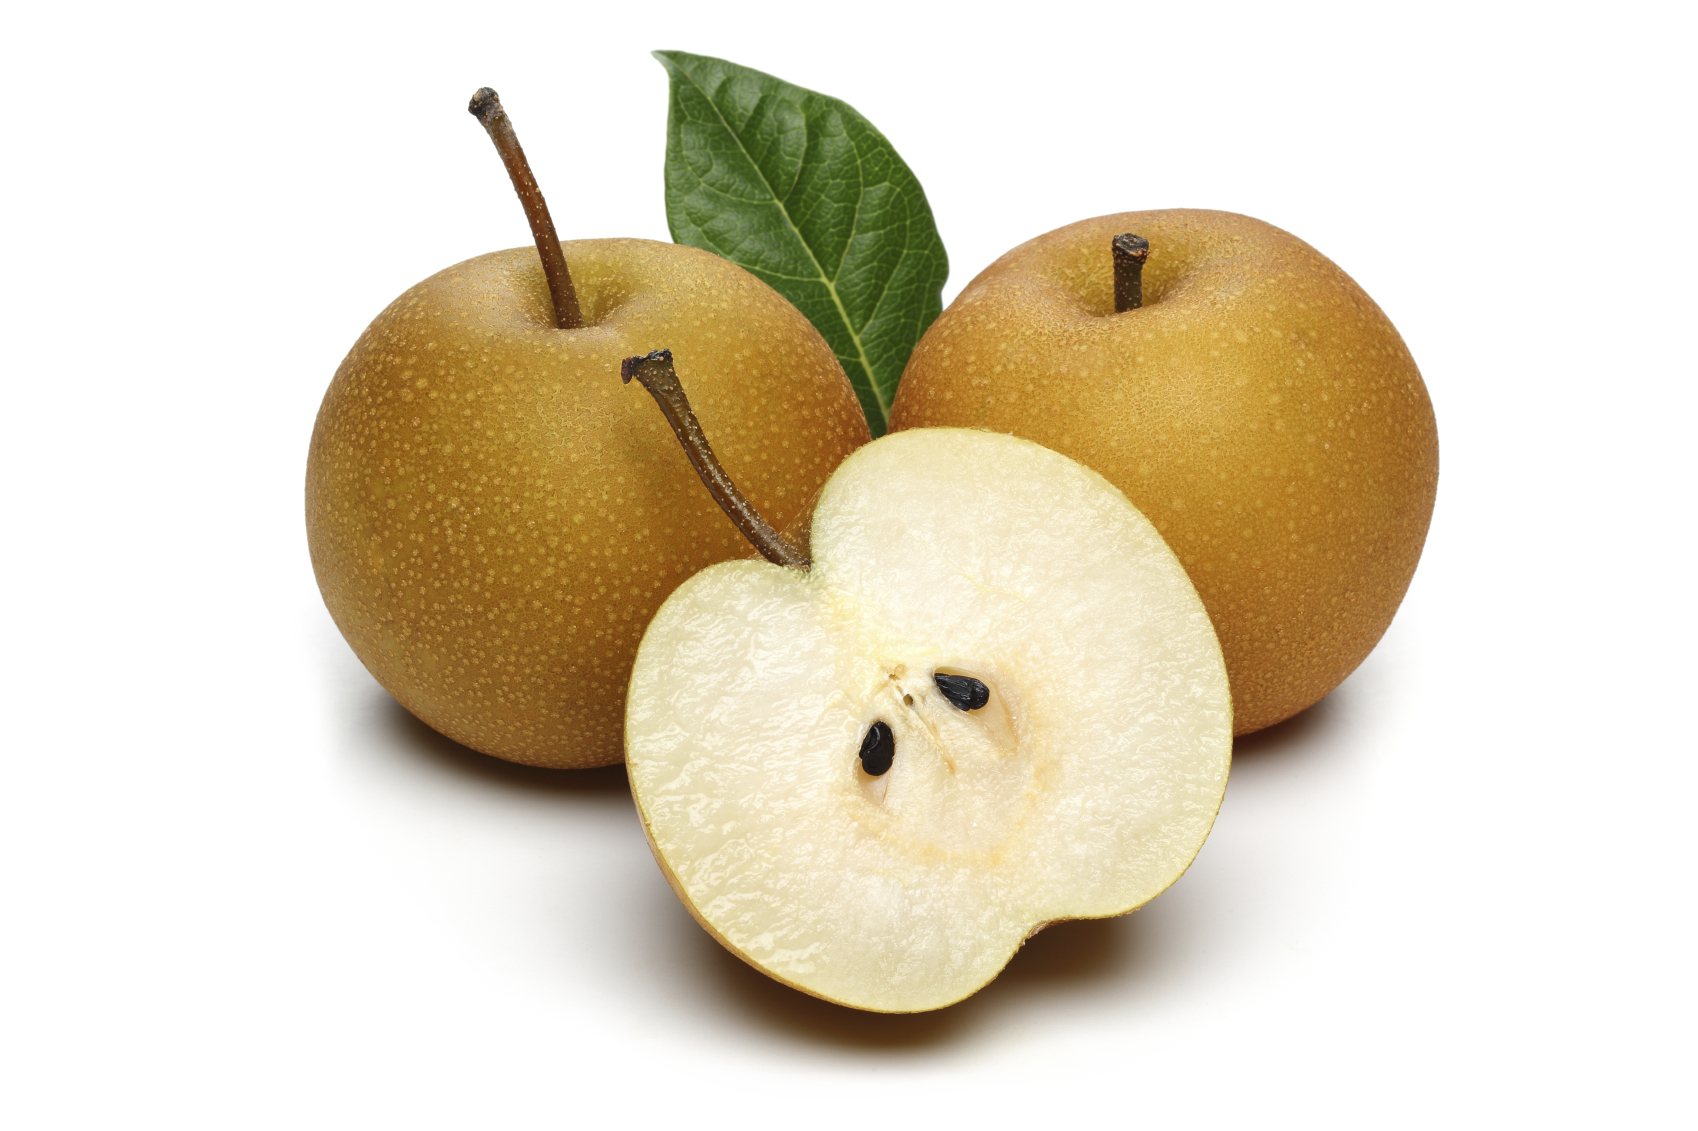 AARP - Asian Pears: A Natural Cure for Hangovers (and Constipation)?